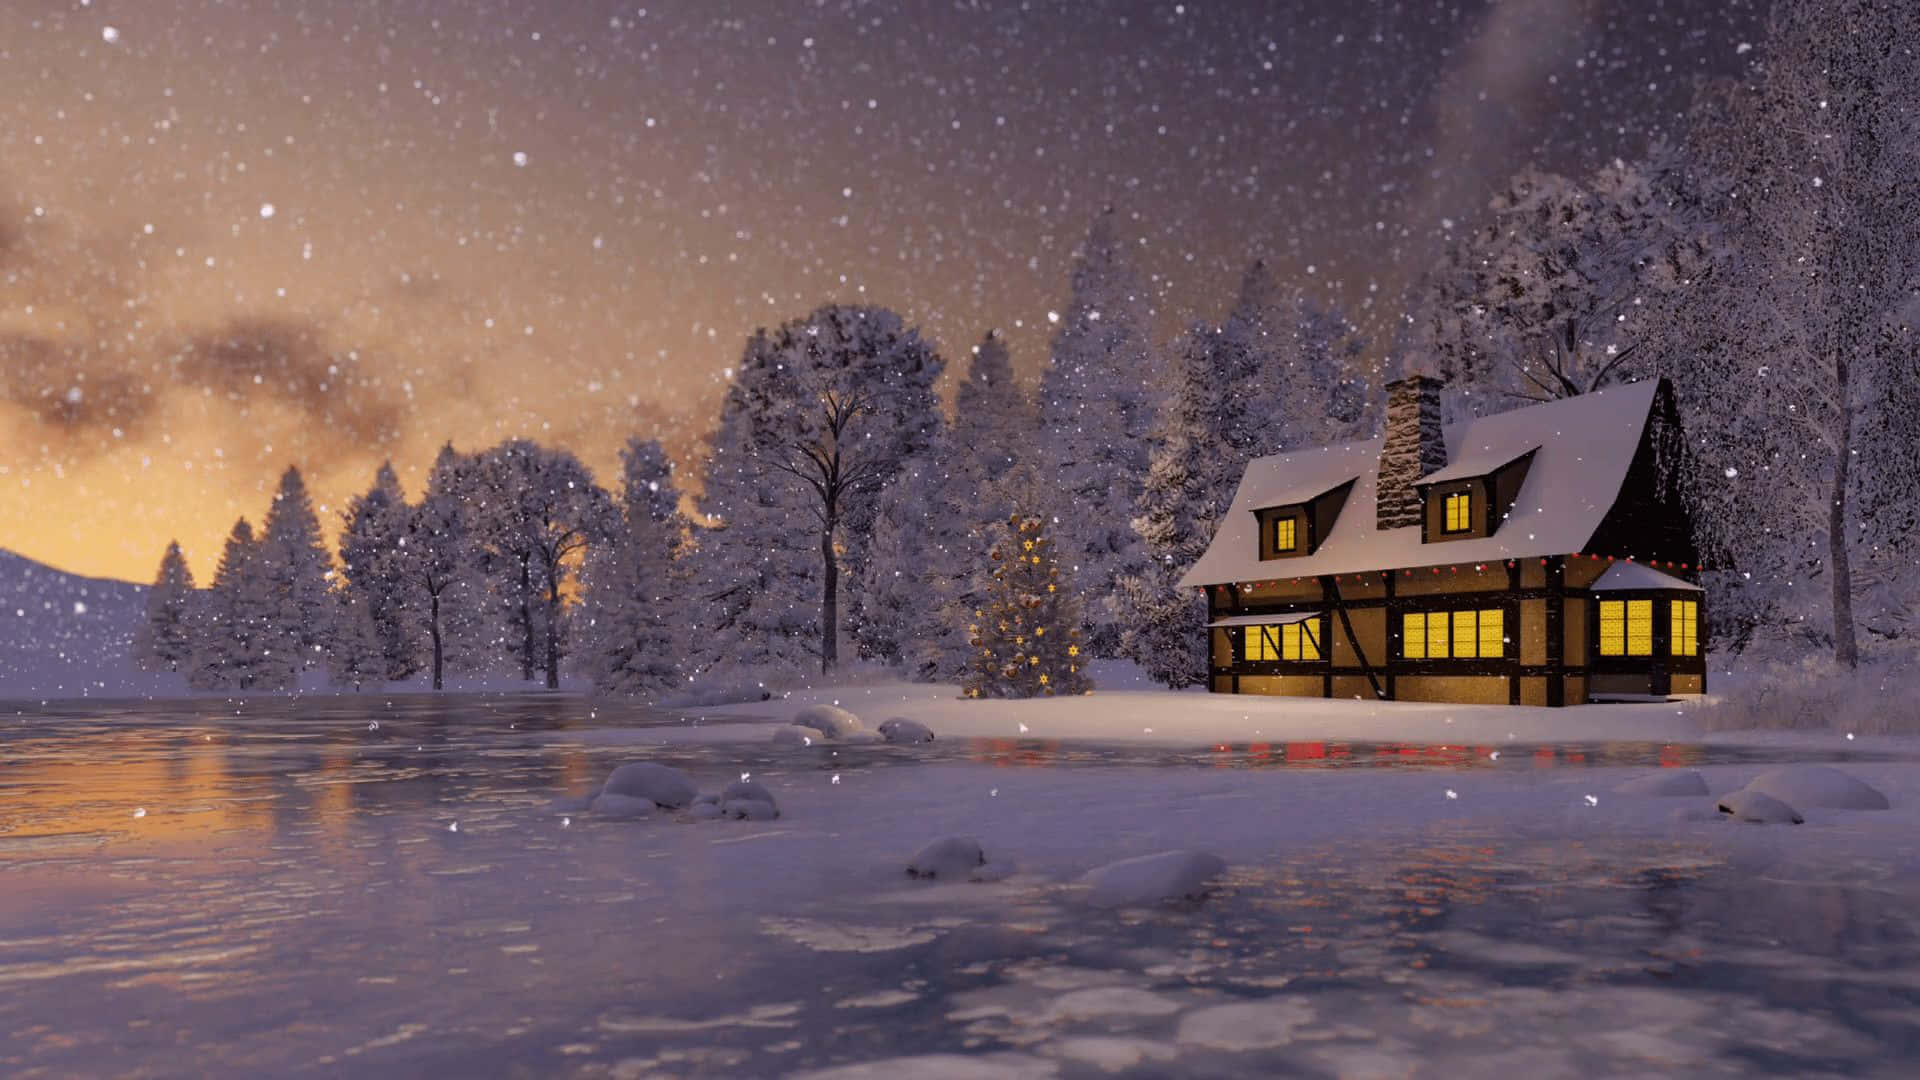 Enjoy the view of winter in all its coziness. Wallpaper